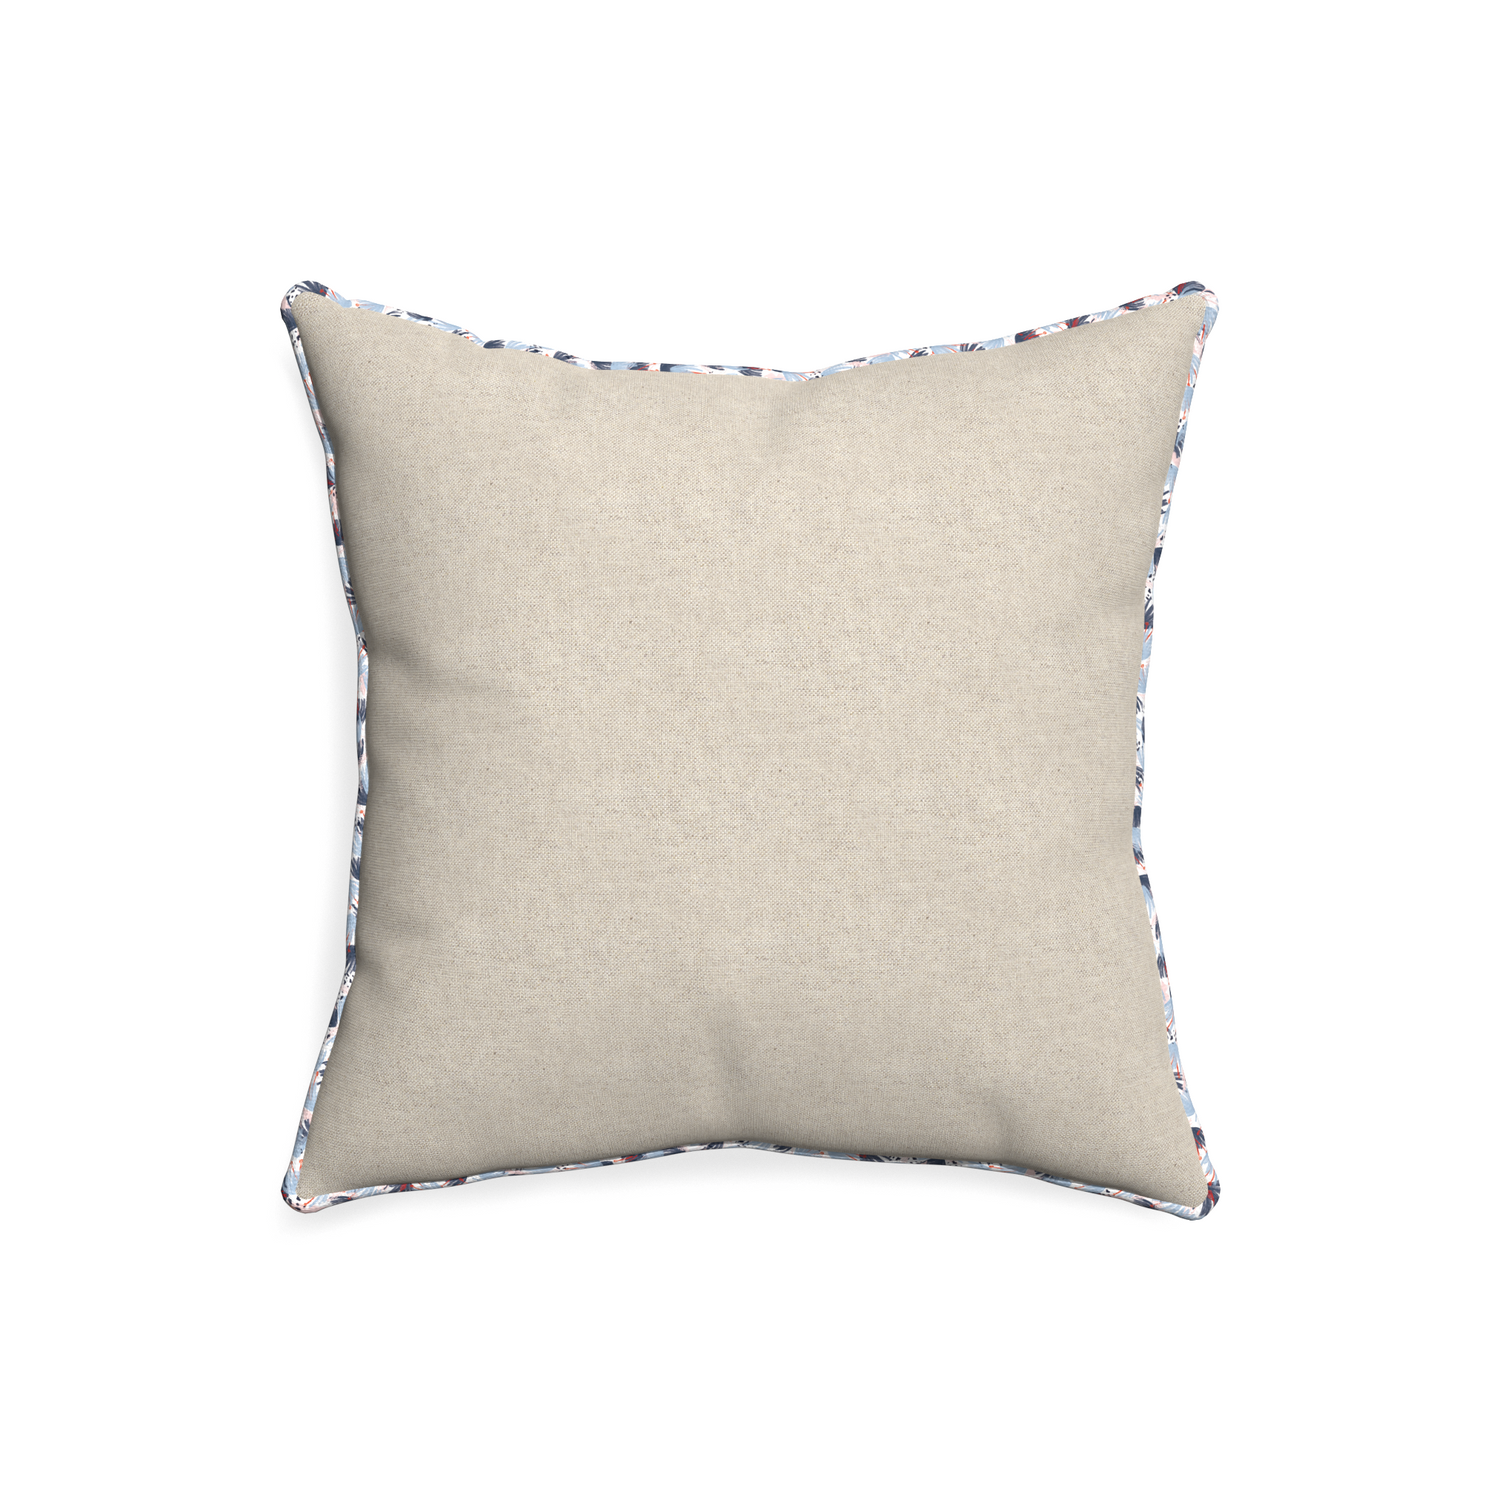 20-square oat custom light brownpillow with e piping on white background